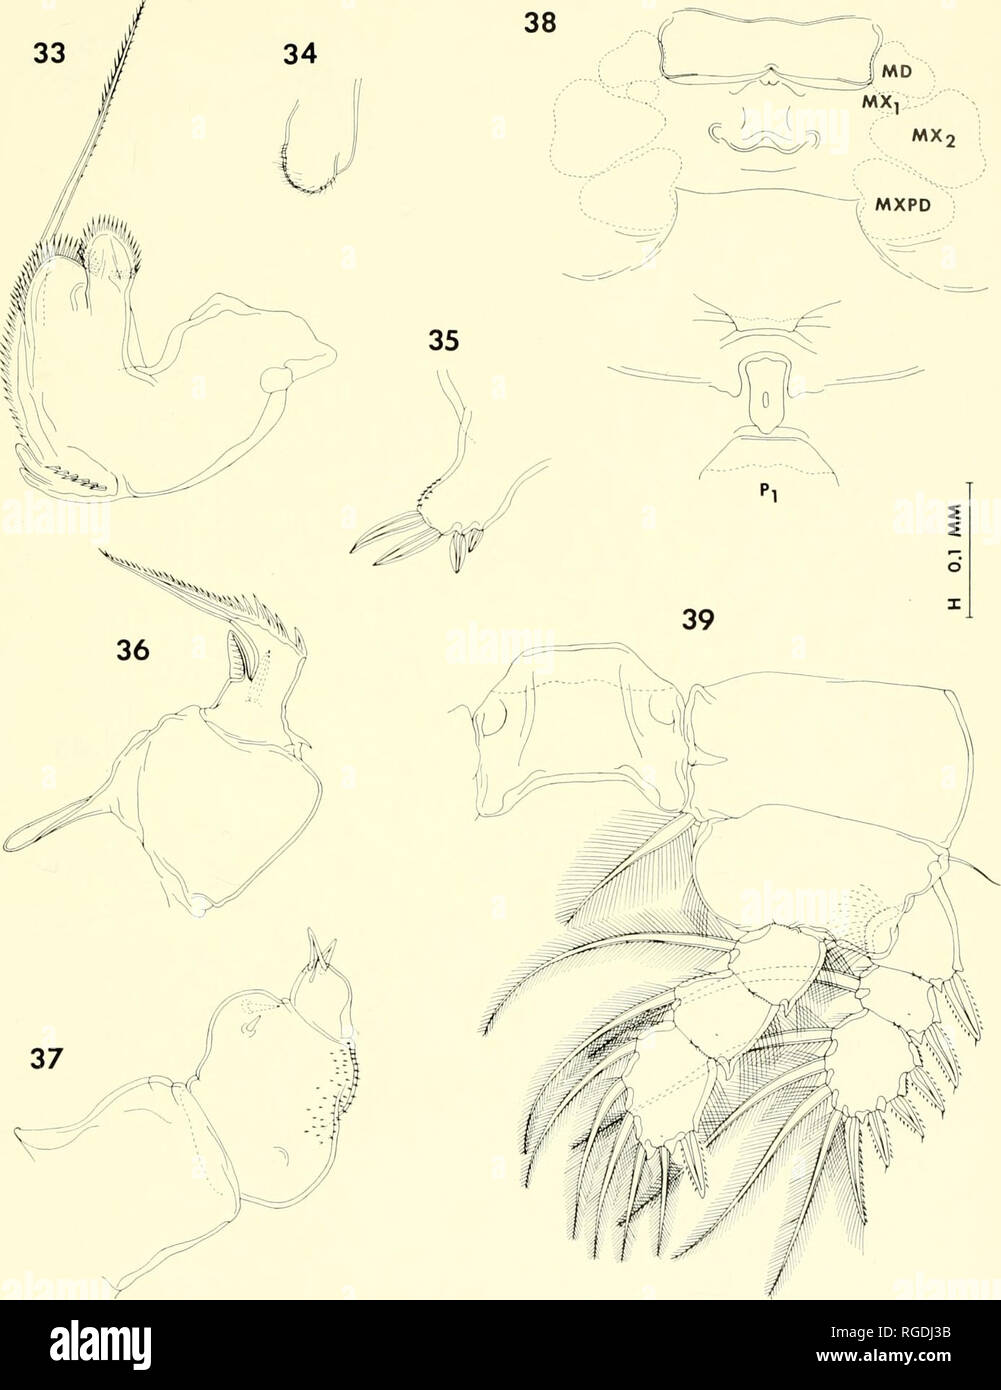 . Bulletin of the Museum of Comparative Zoology at Harvard College. Zoology. COPEPODS FROM CORALS IN MADAGASCAR • Hlimcs Olid Ho 387. Figures 33-39. Lichomolgus digitatus n. sp., female (continued). 33, mandible, posterior (D); 34, paragnath, ventral (D); 35, first maxilla, ventral (D); 36, second maxilla, posterior (E); 37, maxilliped, anterior (D); 38, oral and postoral areas, witfi edge of labrum turned ventrally, ventral (H); 39, leg 1 and intercoxal plate, anterior (E).. Please note that these images are extracted from scanned page images that may have been digitally enhanced for readabil Stock Photo